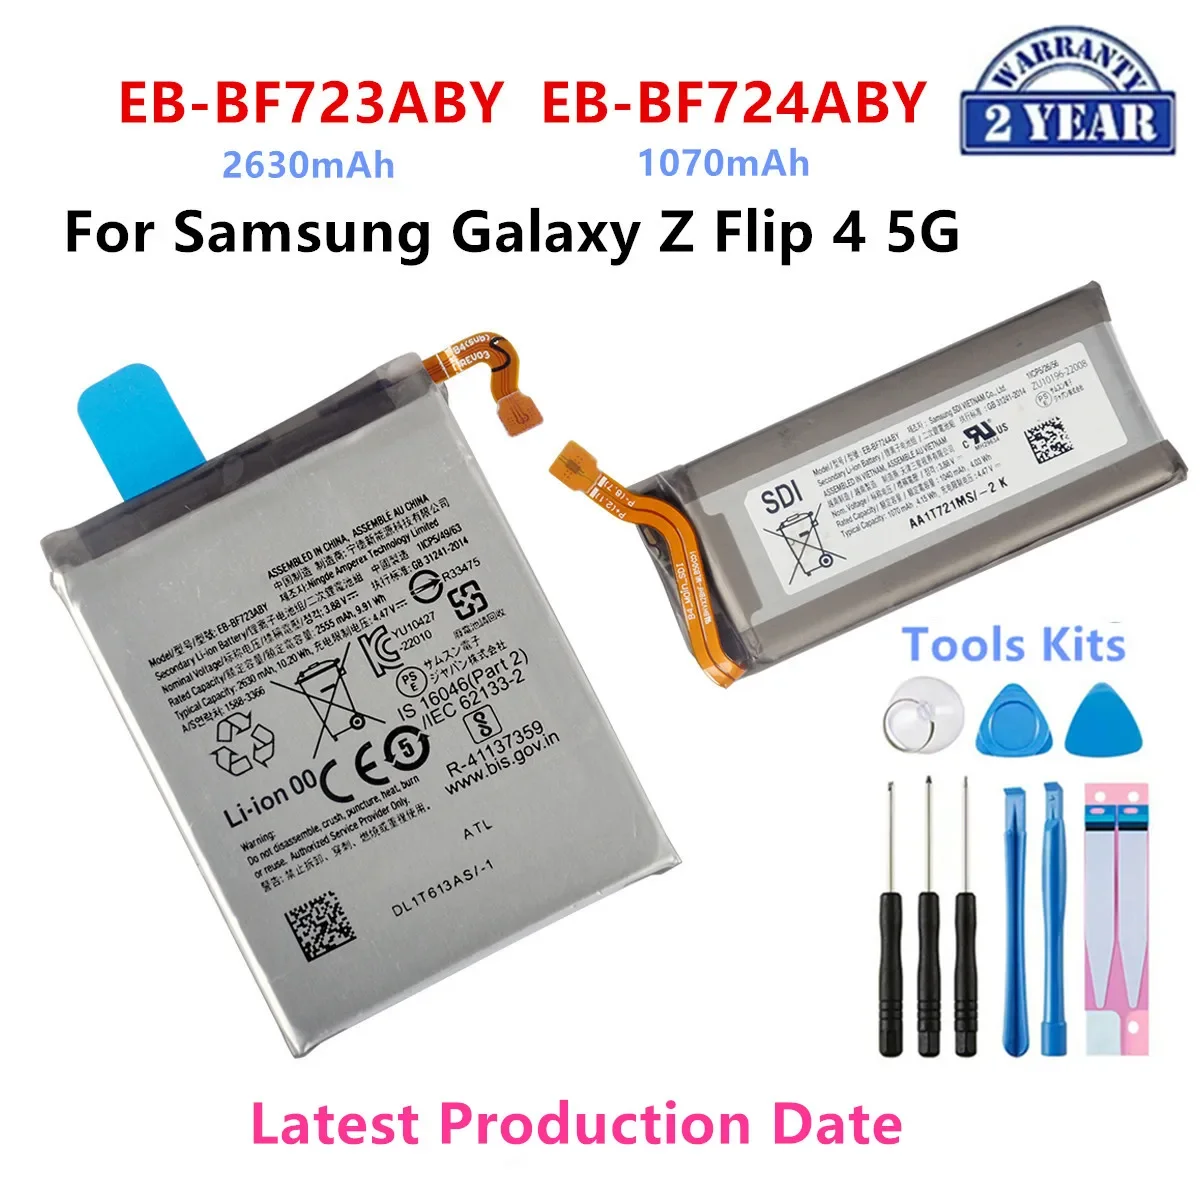 

Brand New EB-BF723ABY EB-BF724ABY Battery For Samsung Galaxy Z Flip 4 5G F723 F724 SM-F7210 Replacement Batteries+Tools